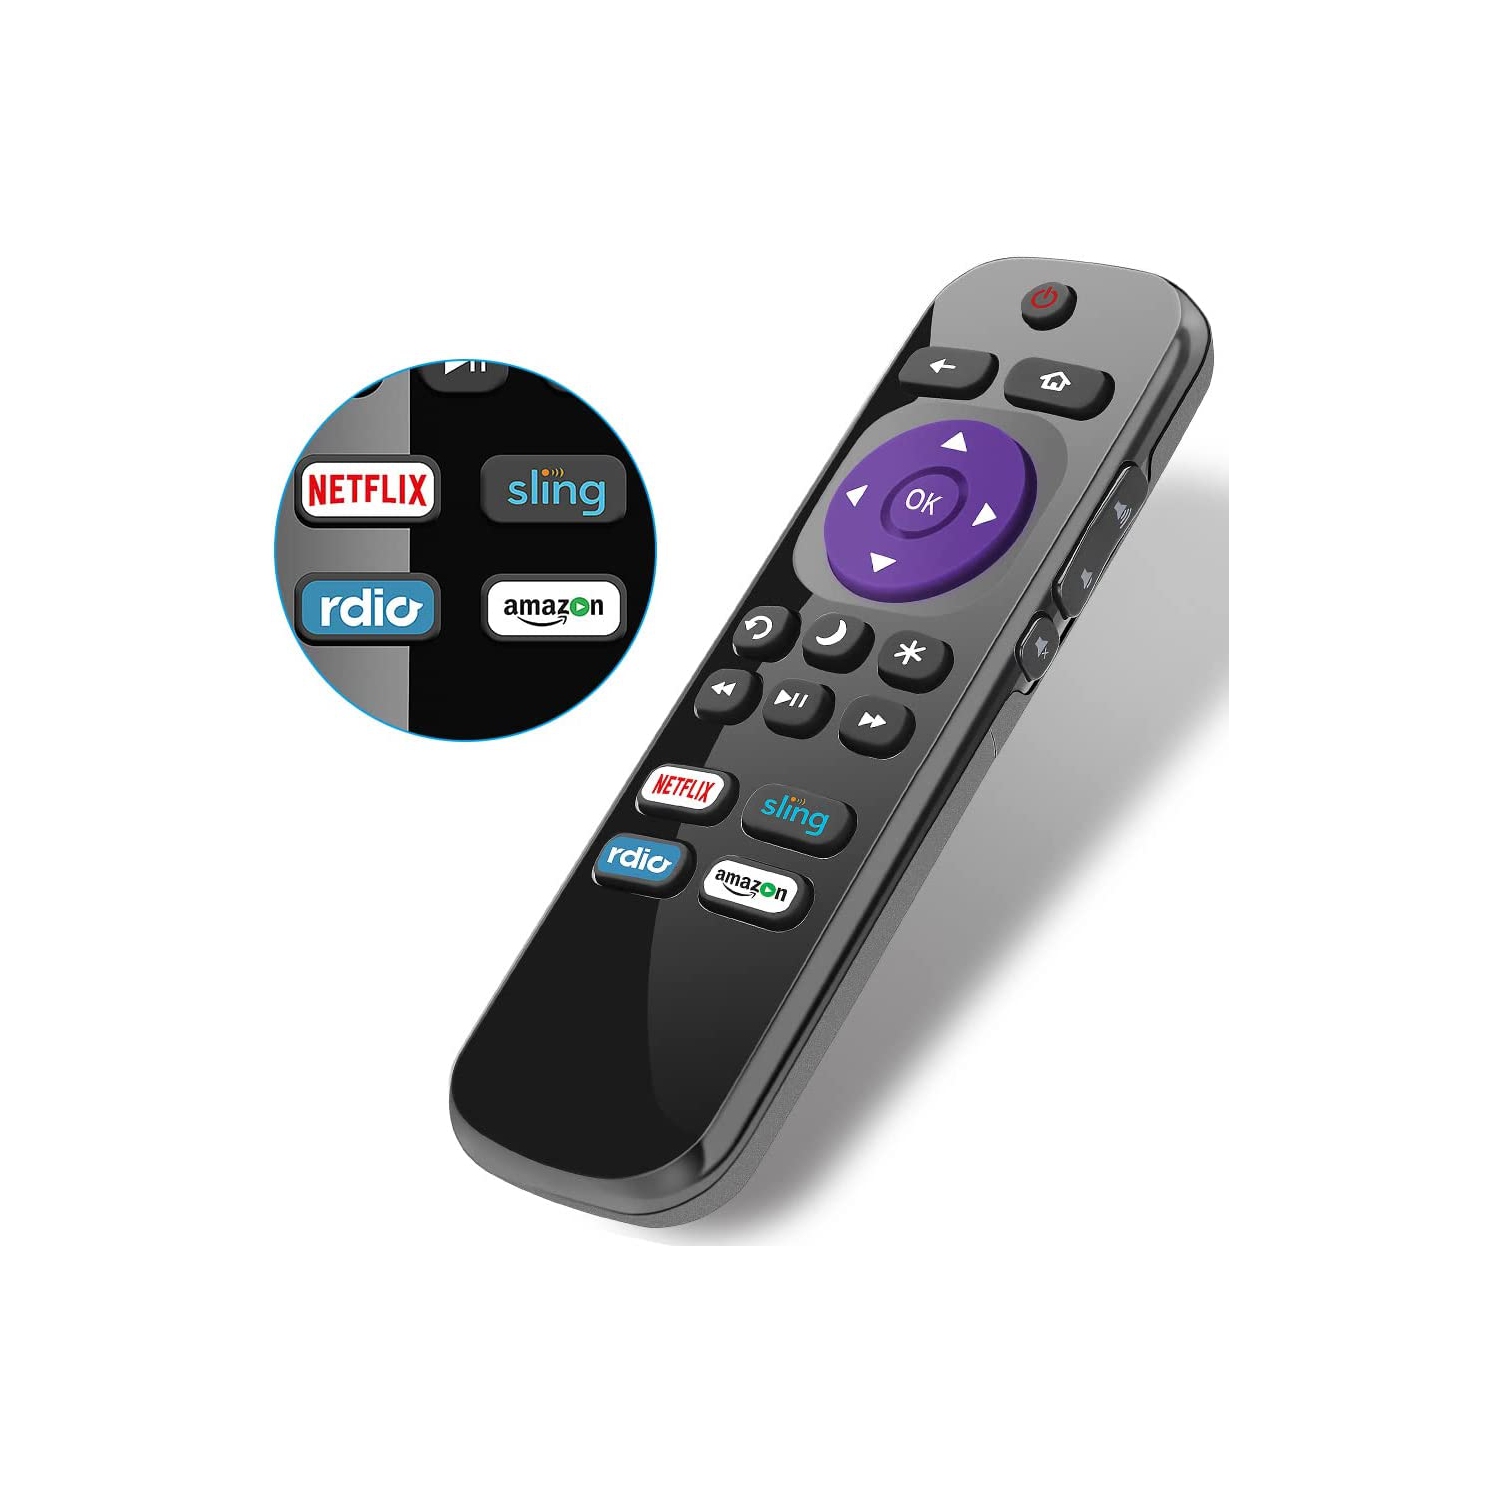 Universal Roku Remote Control Replacement for RCA Roku Smart TV Remote and Roku RCA Smart TV 32 40 43 49 50 55 60 65 70 inch, 4K LED LCD HDR UHD Smart TV